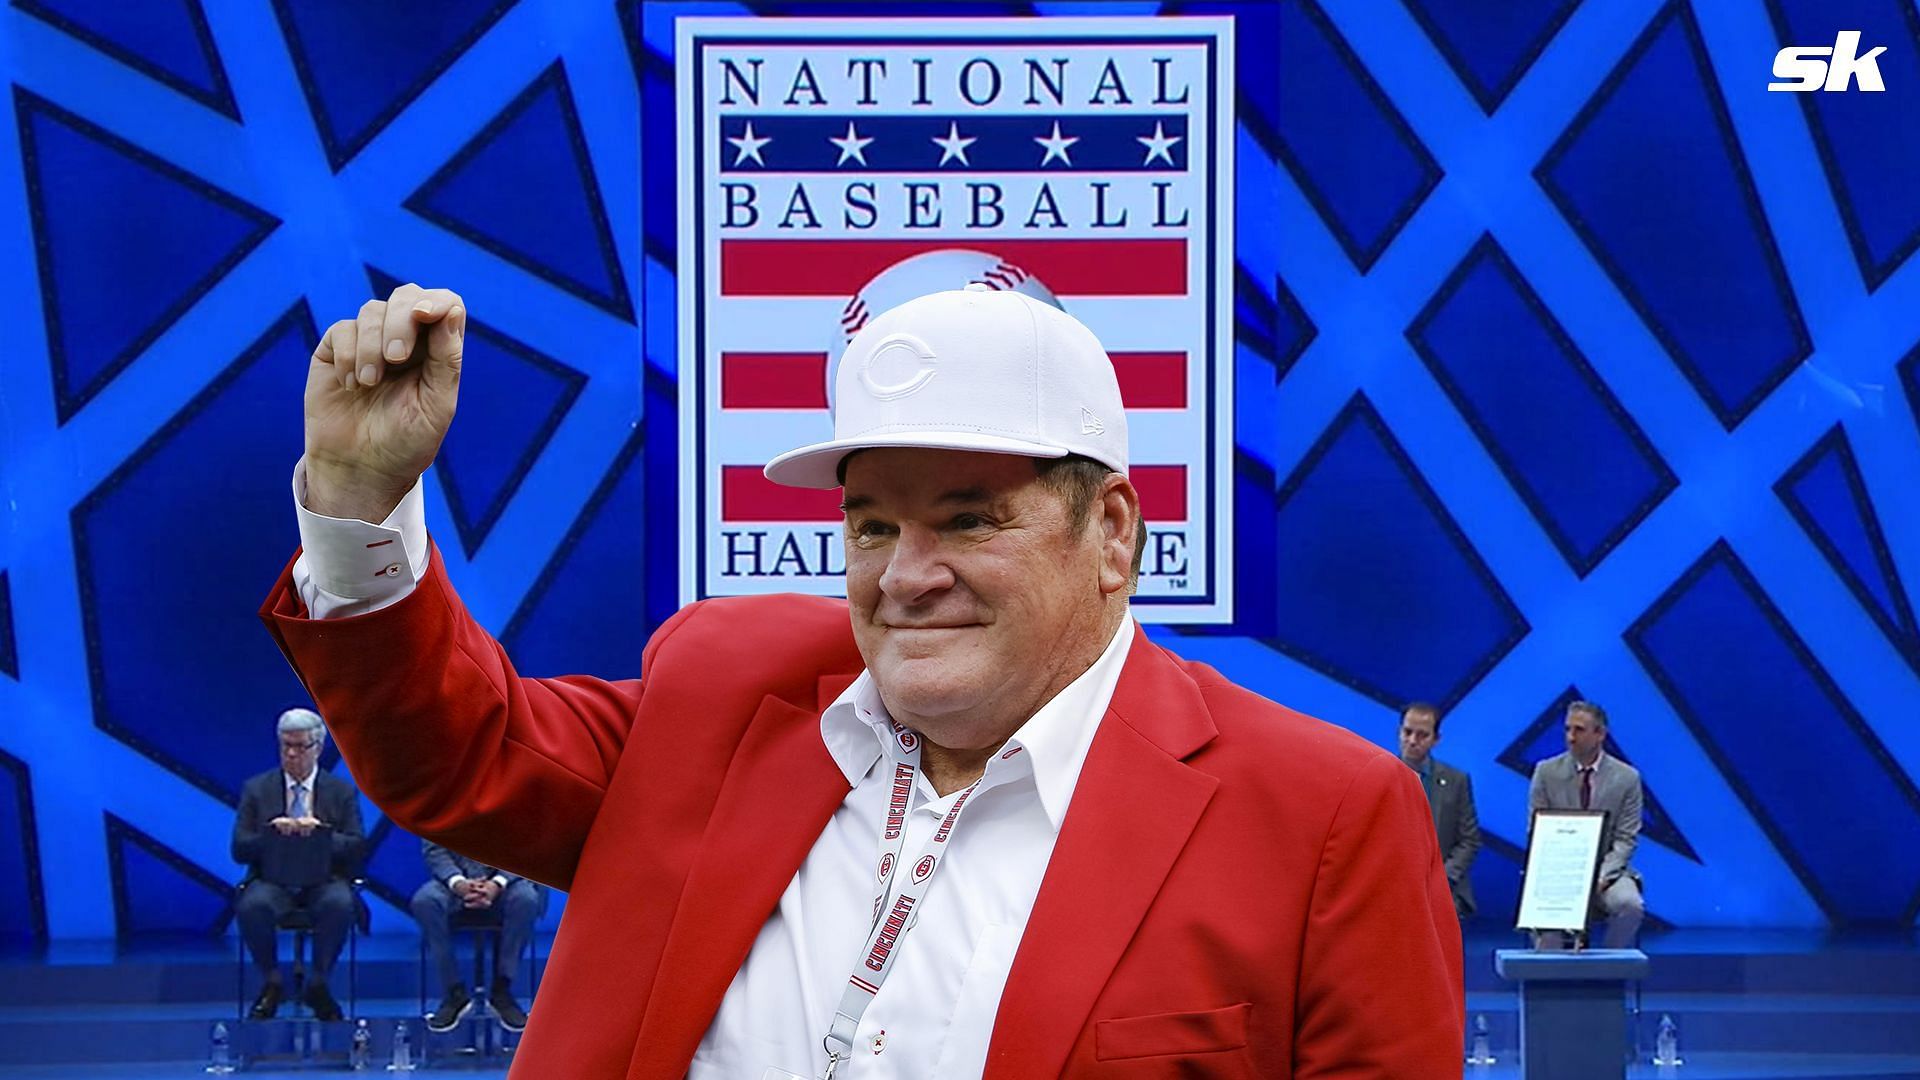 We asked AI if Pete Rose deserves to be in the Hall of Fame (&amp; its answer may raise some eyebrows)